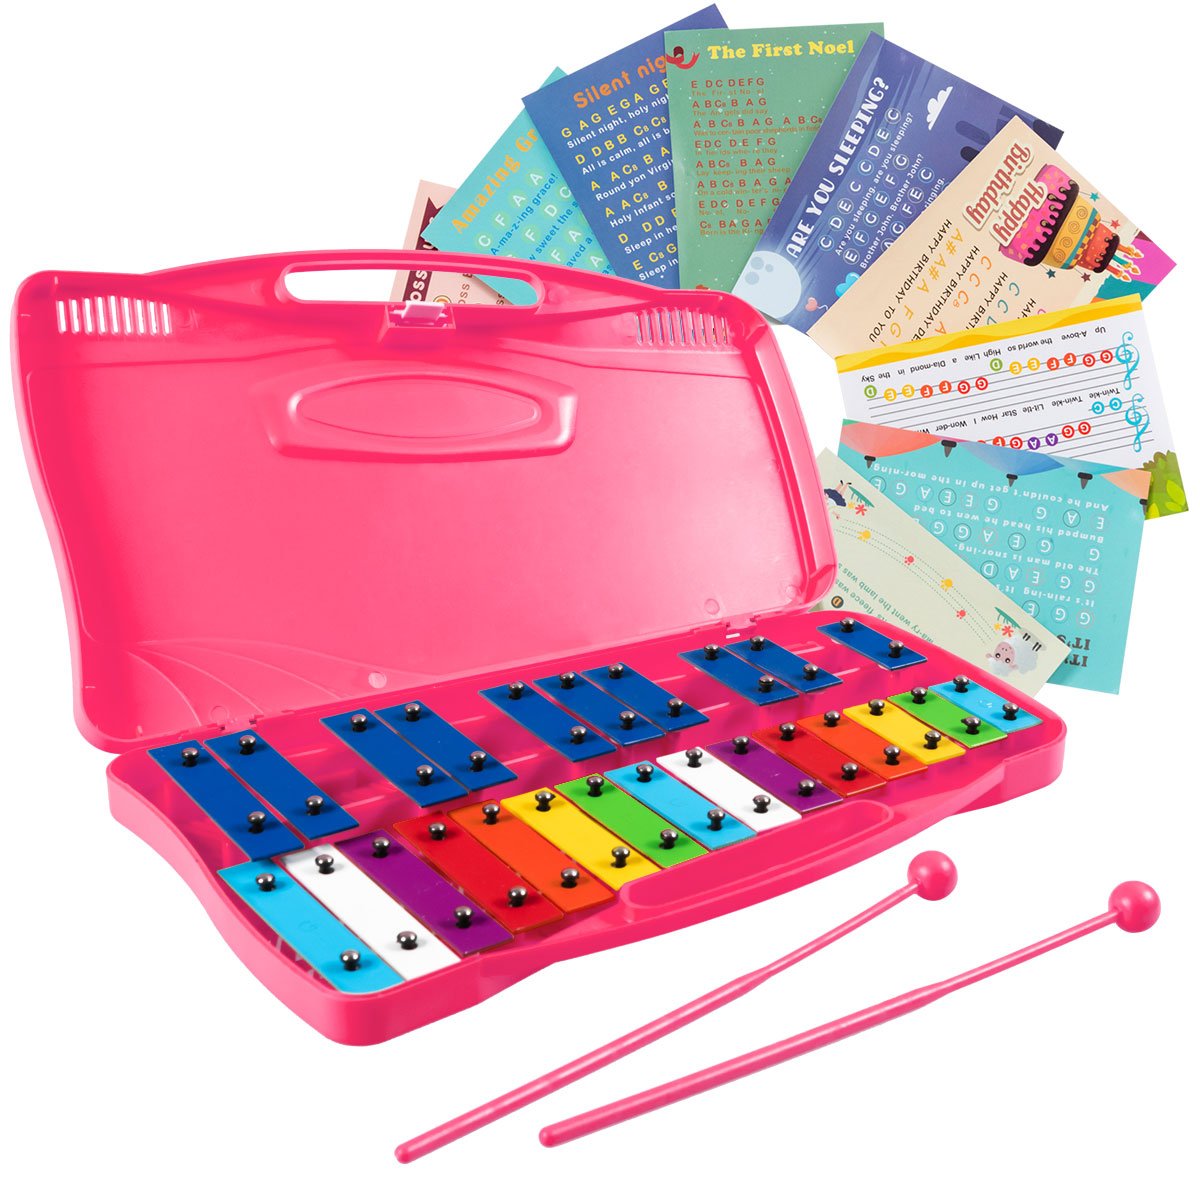 Musical Magic: 25 Note Xylophone with Suitcase for Kids Pink